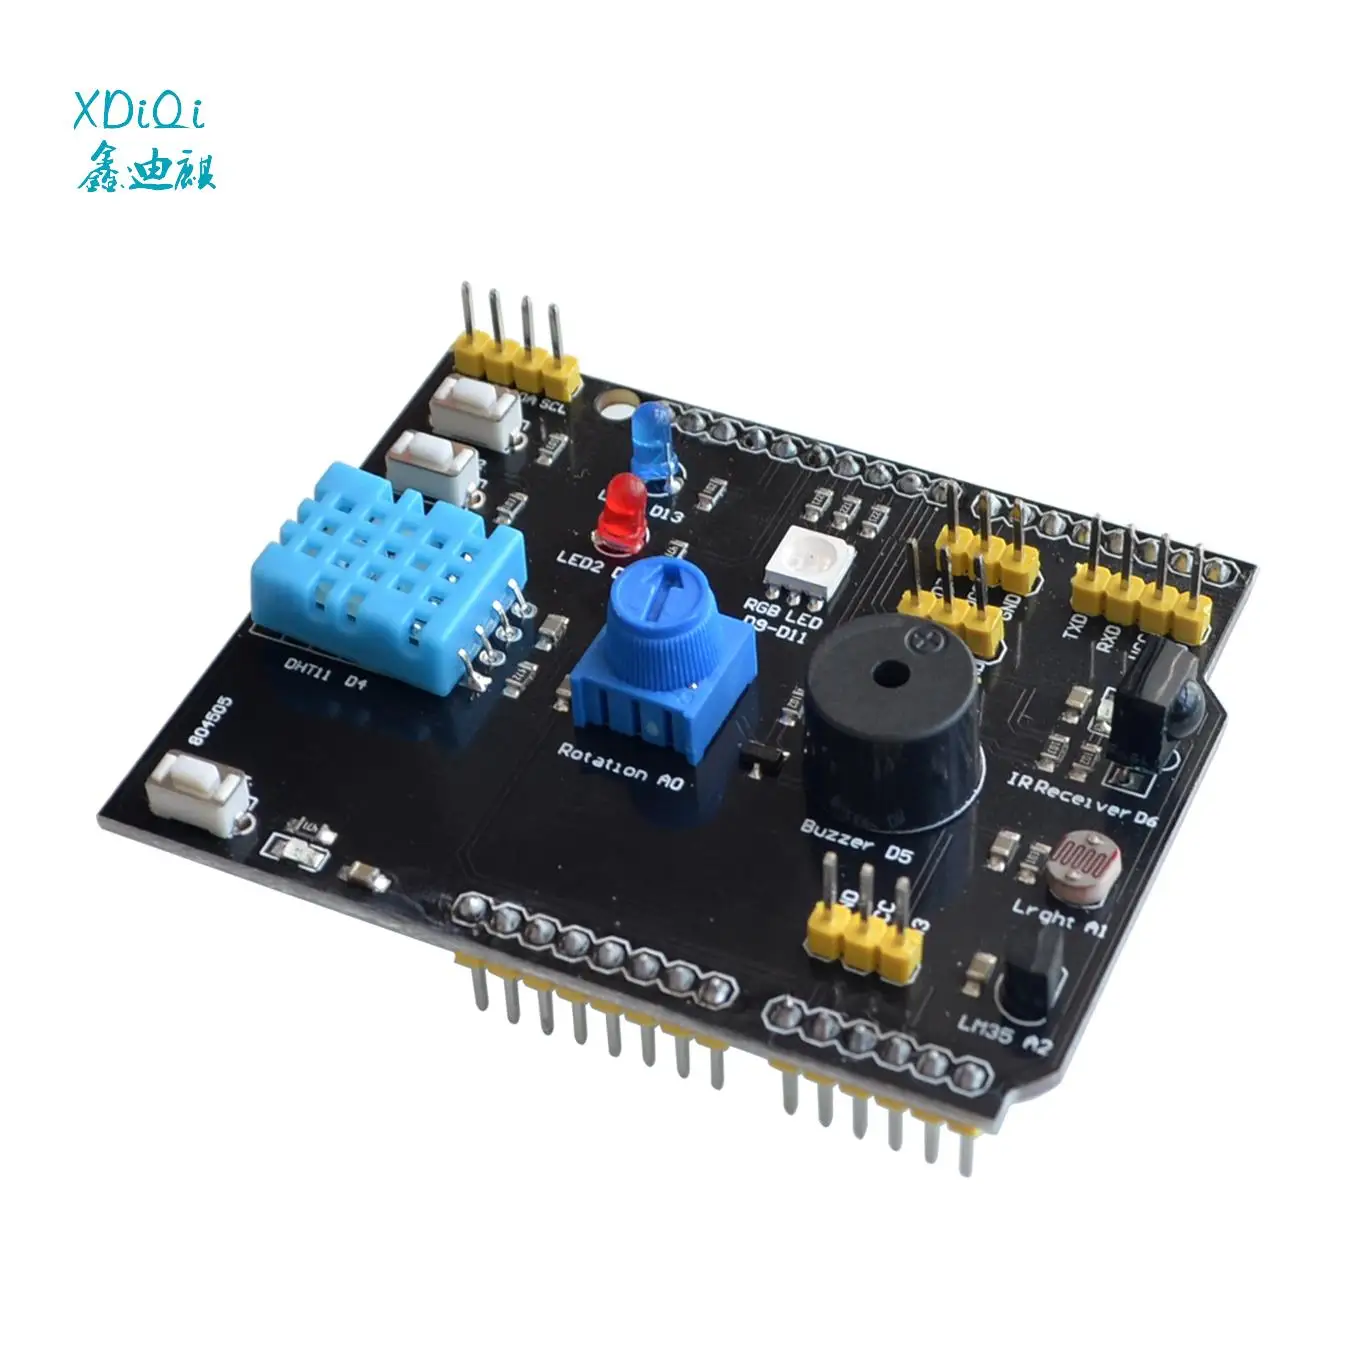 

DHT11 LM35 Temperature Humidity Sensor Multifunction Expansion Board Adapter For Arduino UNO R3 RGB LED IR Receiver Buzzer I2C